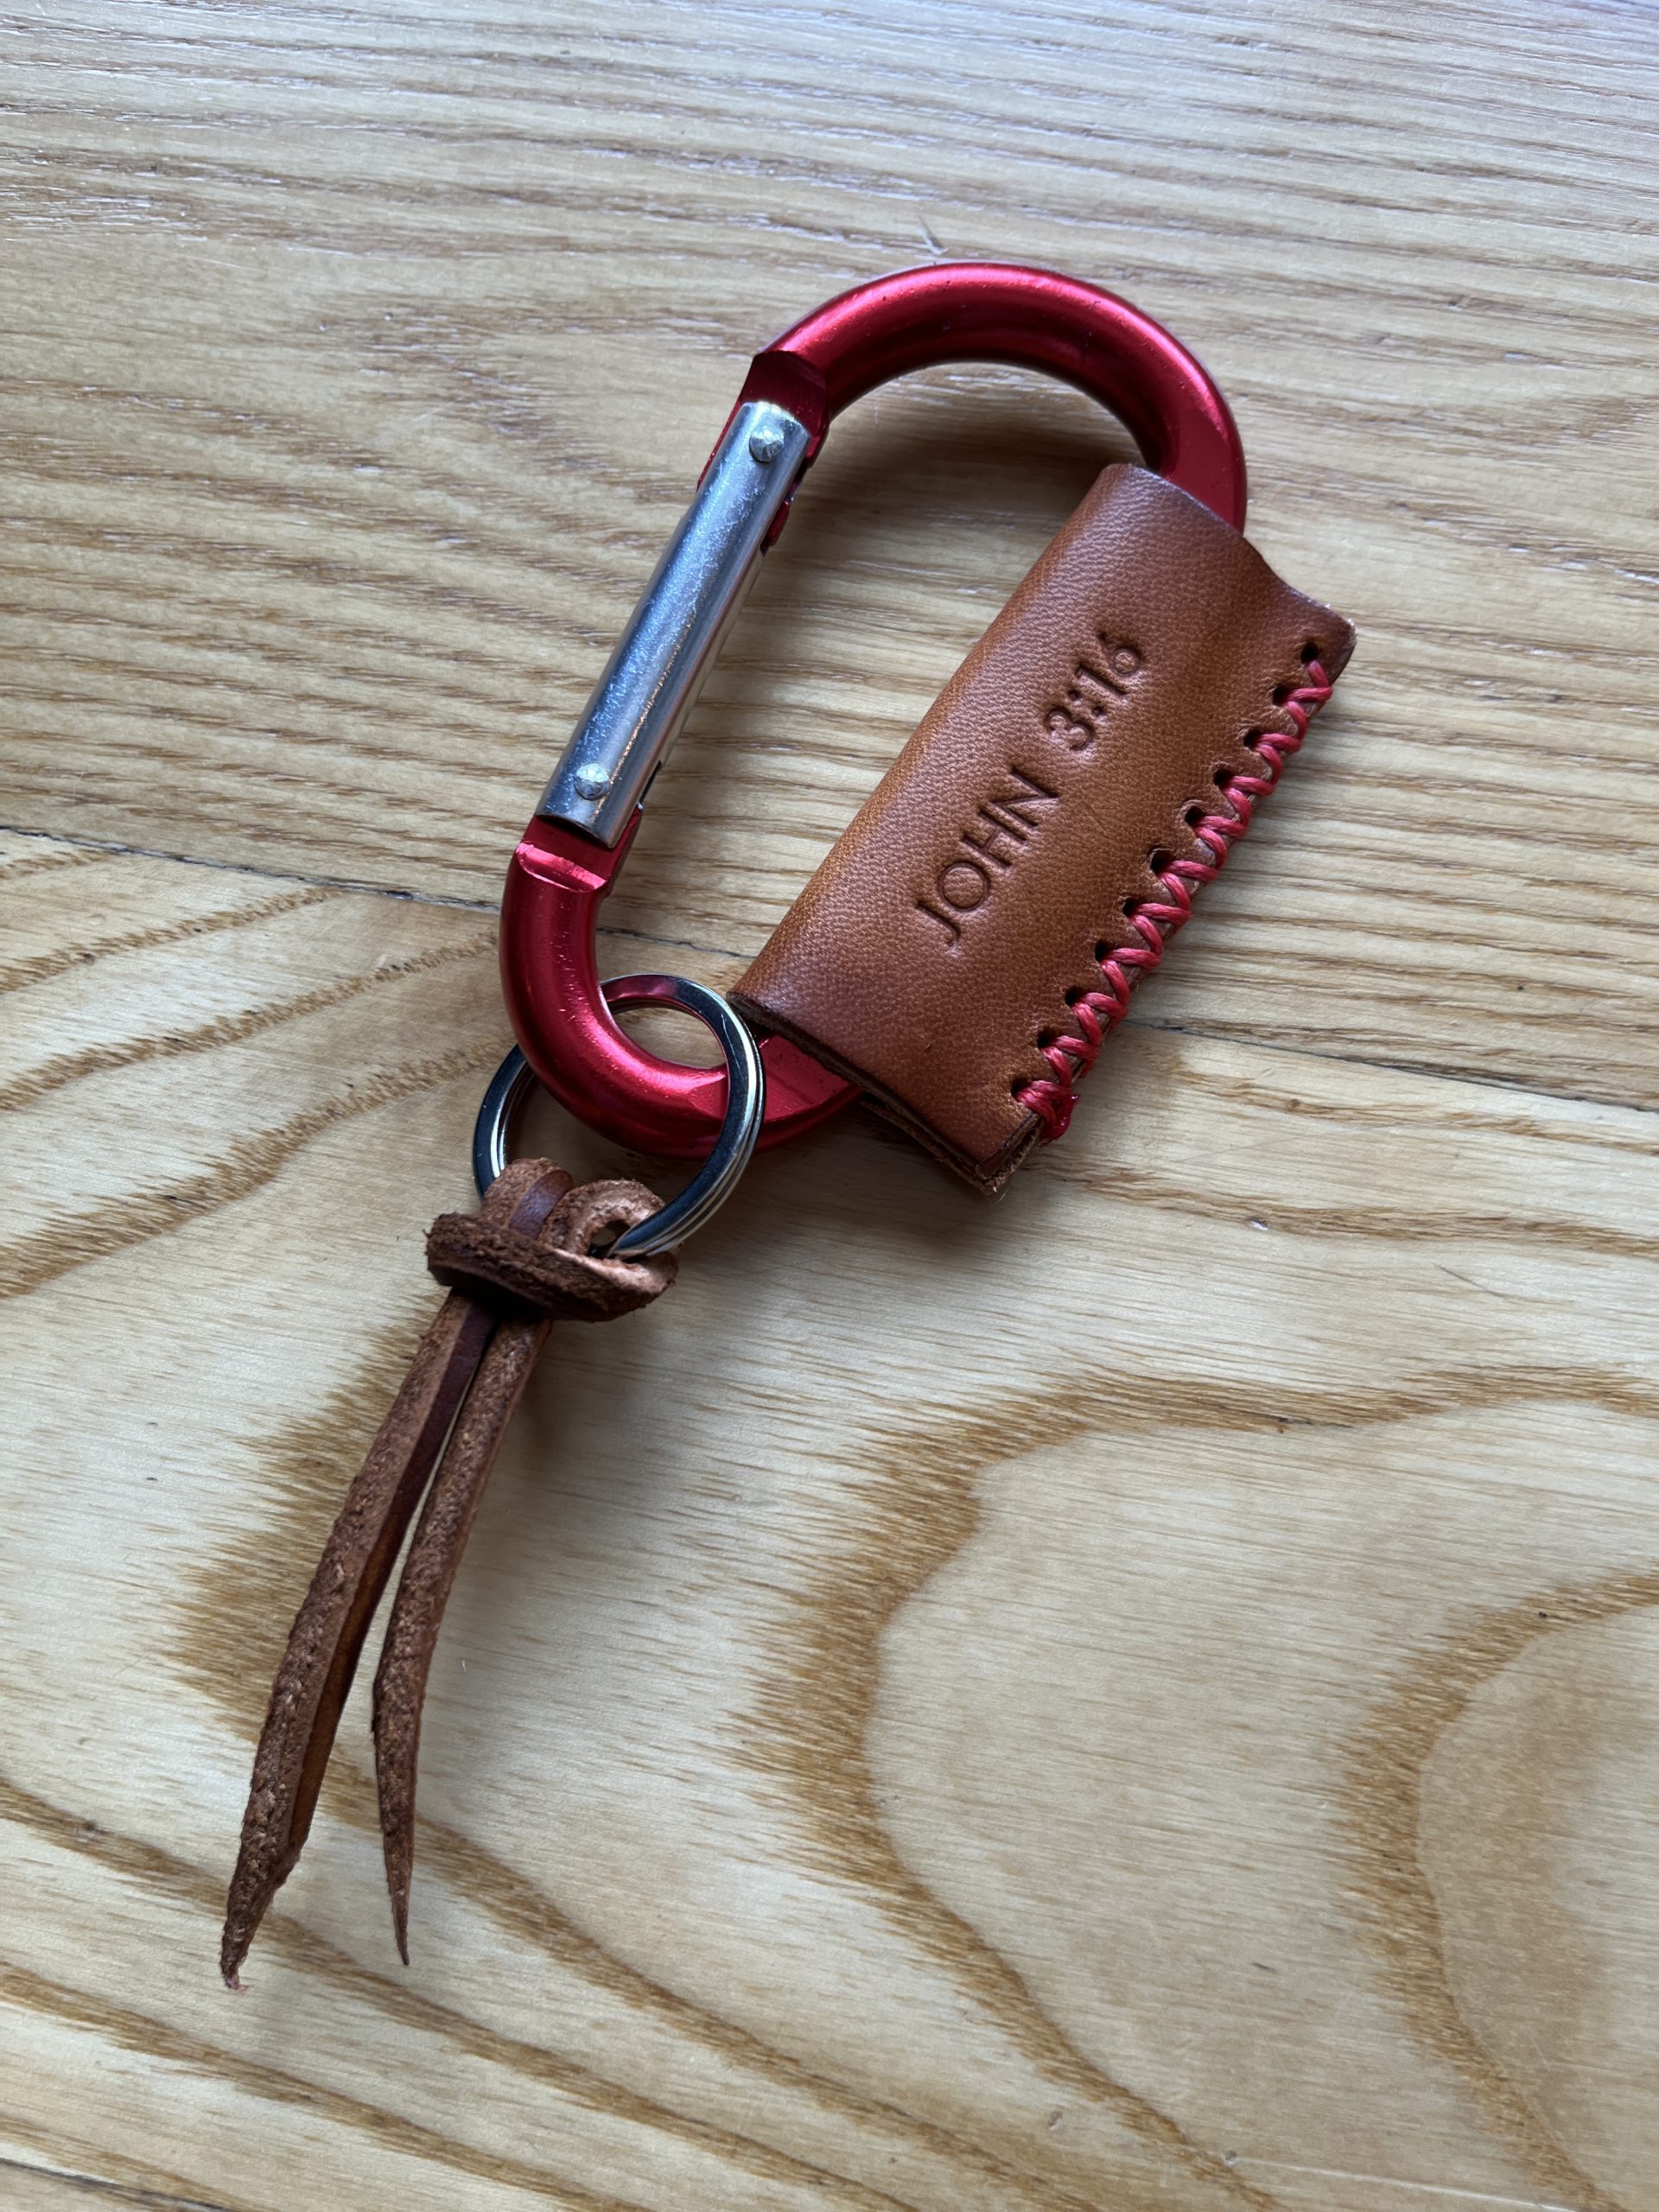 Custom Carabiner Leather Key Chain - Red Tractor Leather Co.